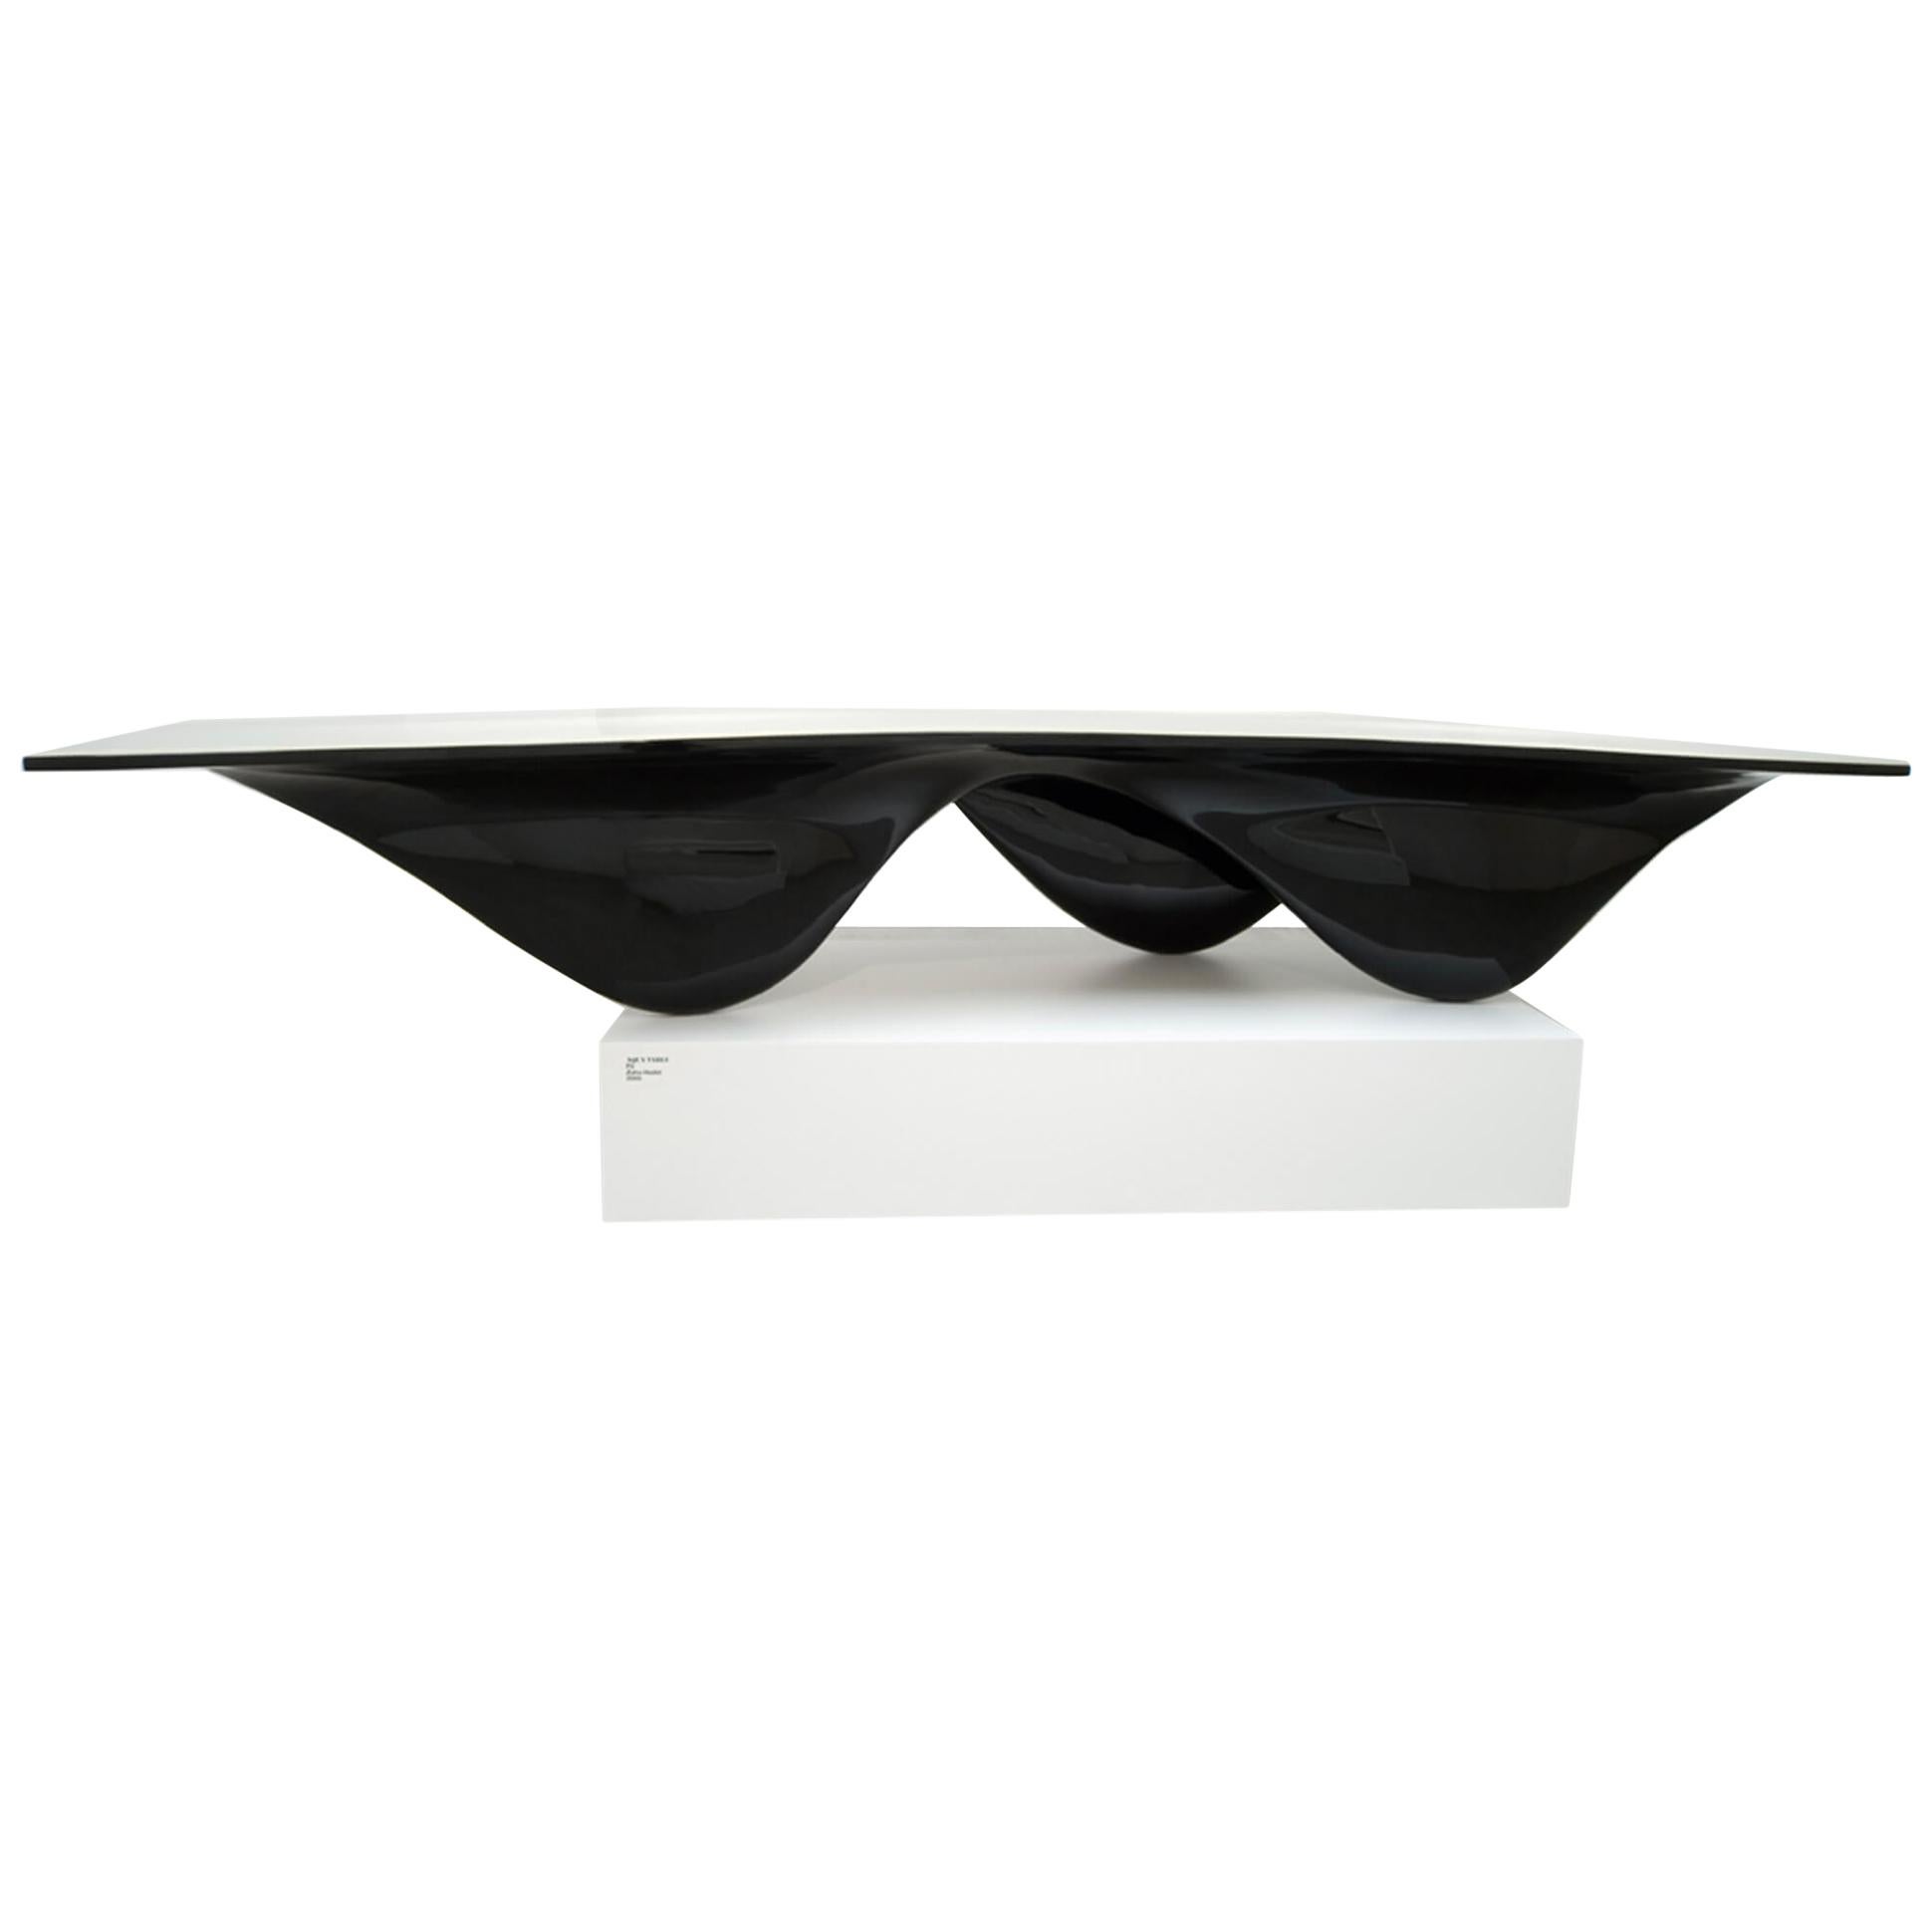 Aqua Table Limited Edition Black with White Top